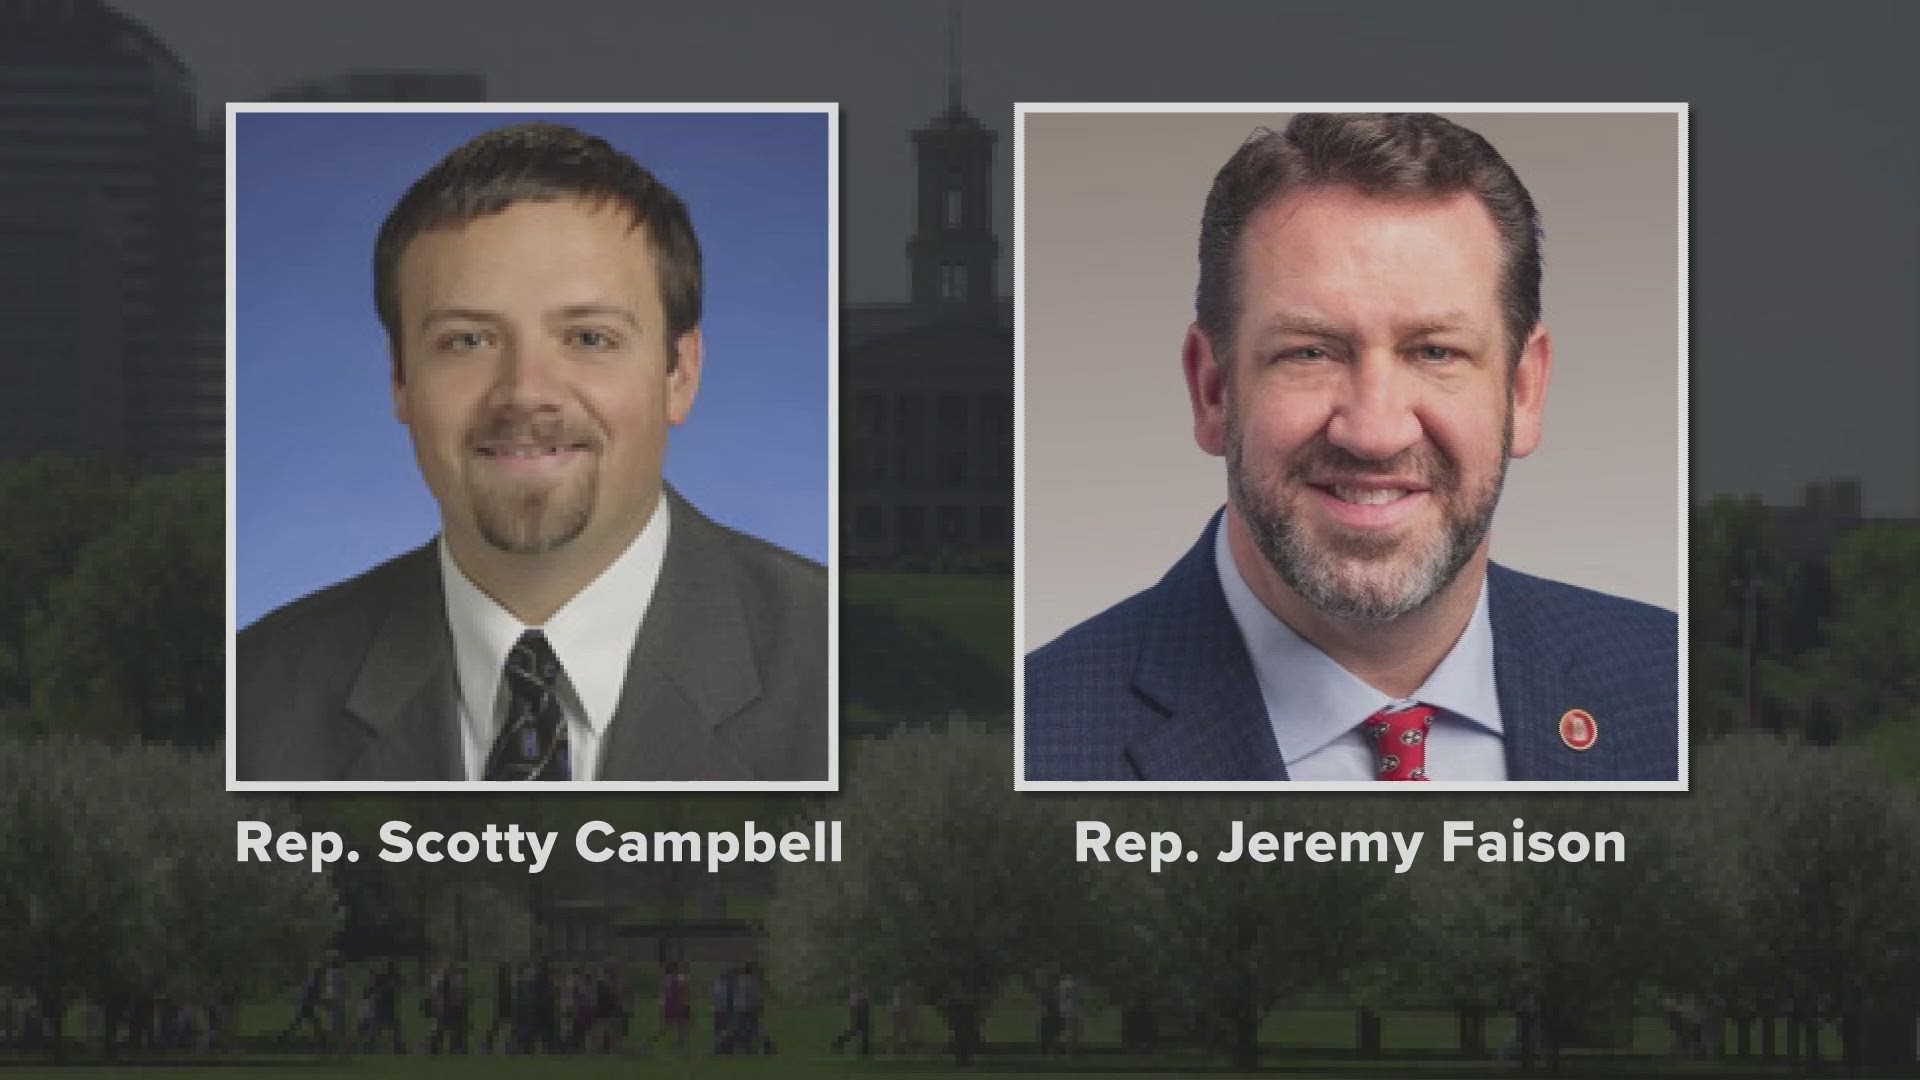 The lawsuit accuses Faison of forcing Scotty Campbell to resign from the House in order to keep a separate lawsuit secret.